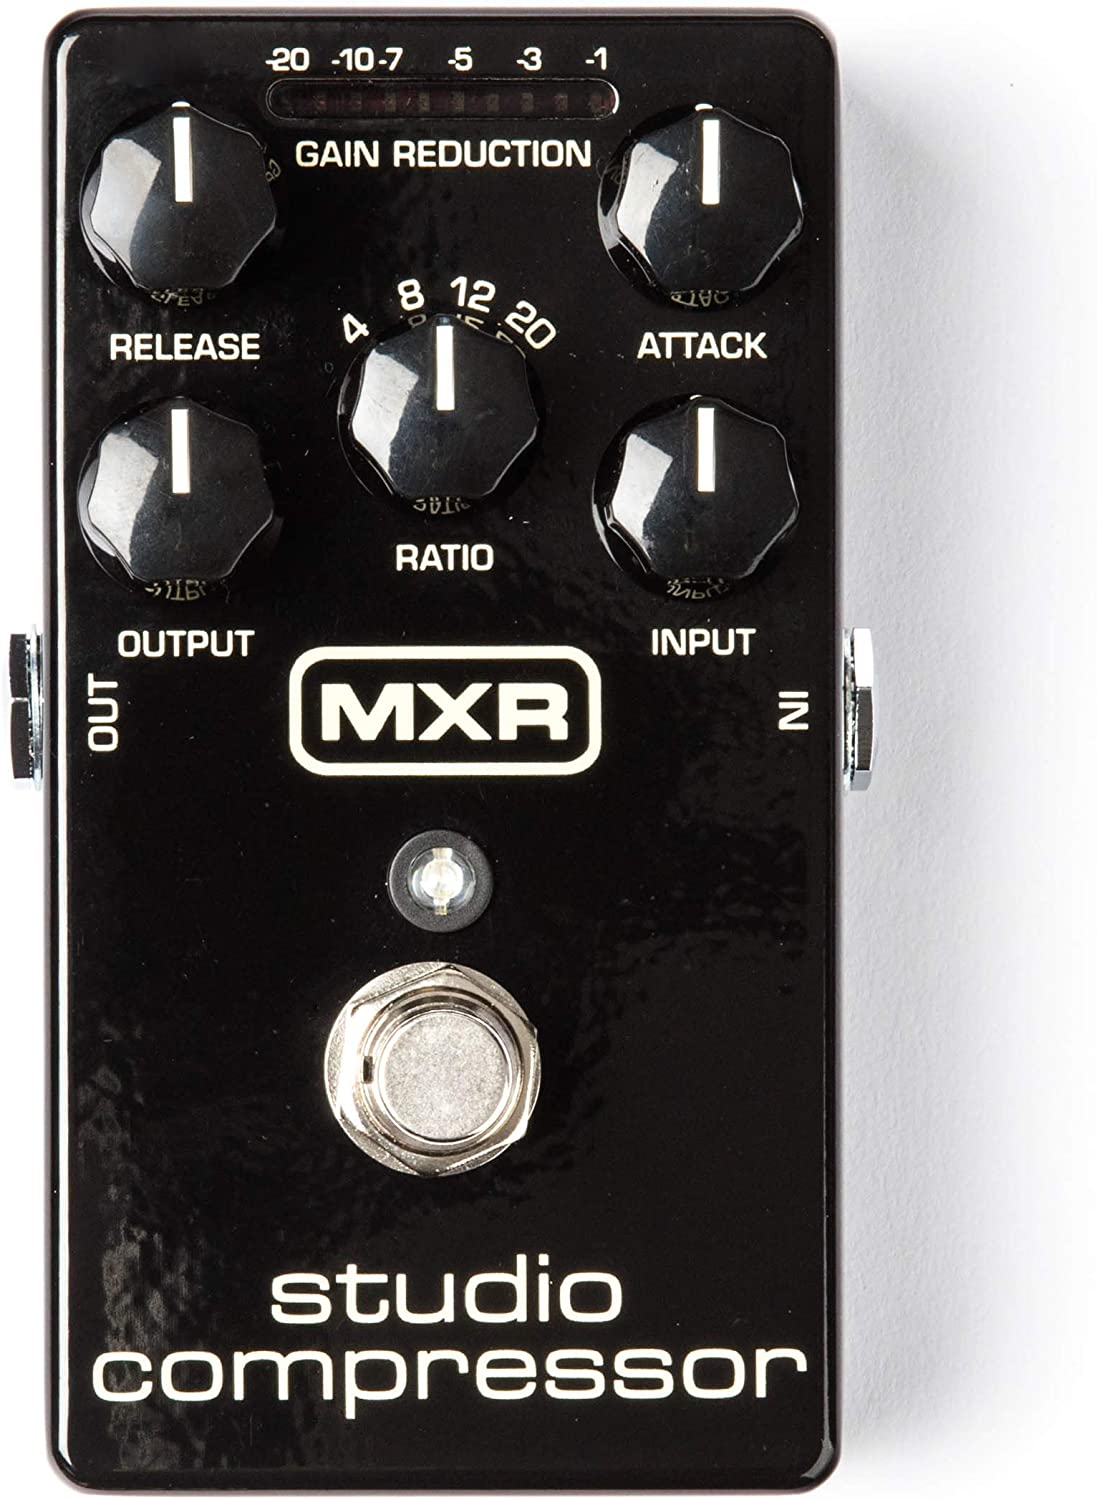 MXR Studio Compressor Guitar Effects Pedal on a white background